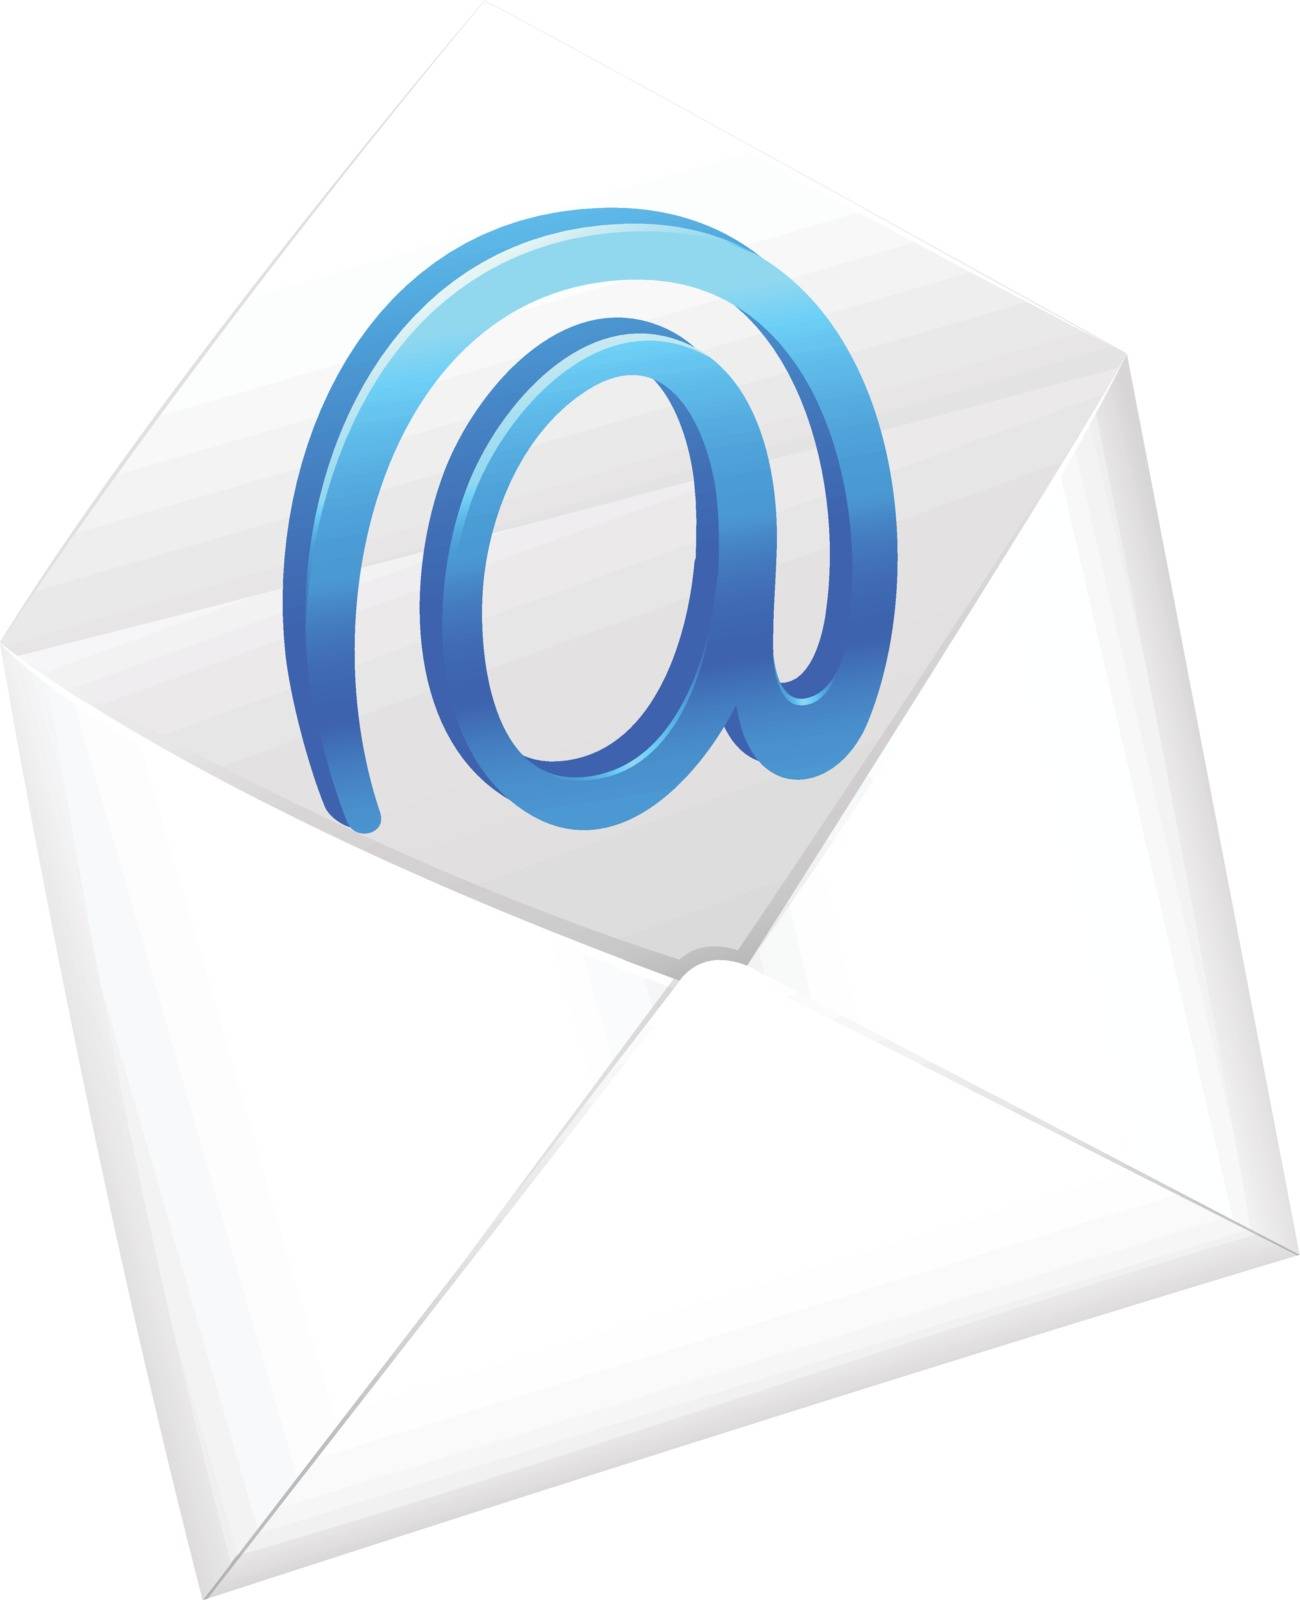 illustration of a envelop on a white background